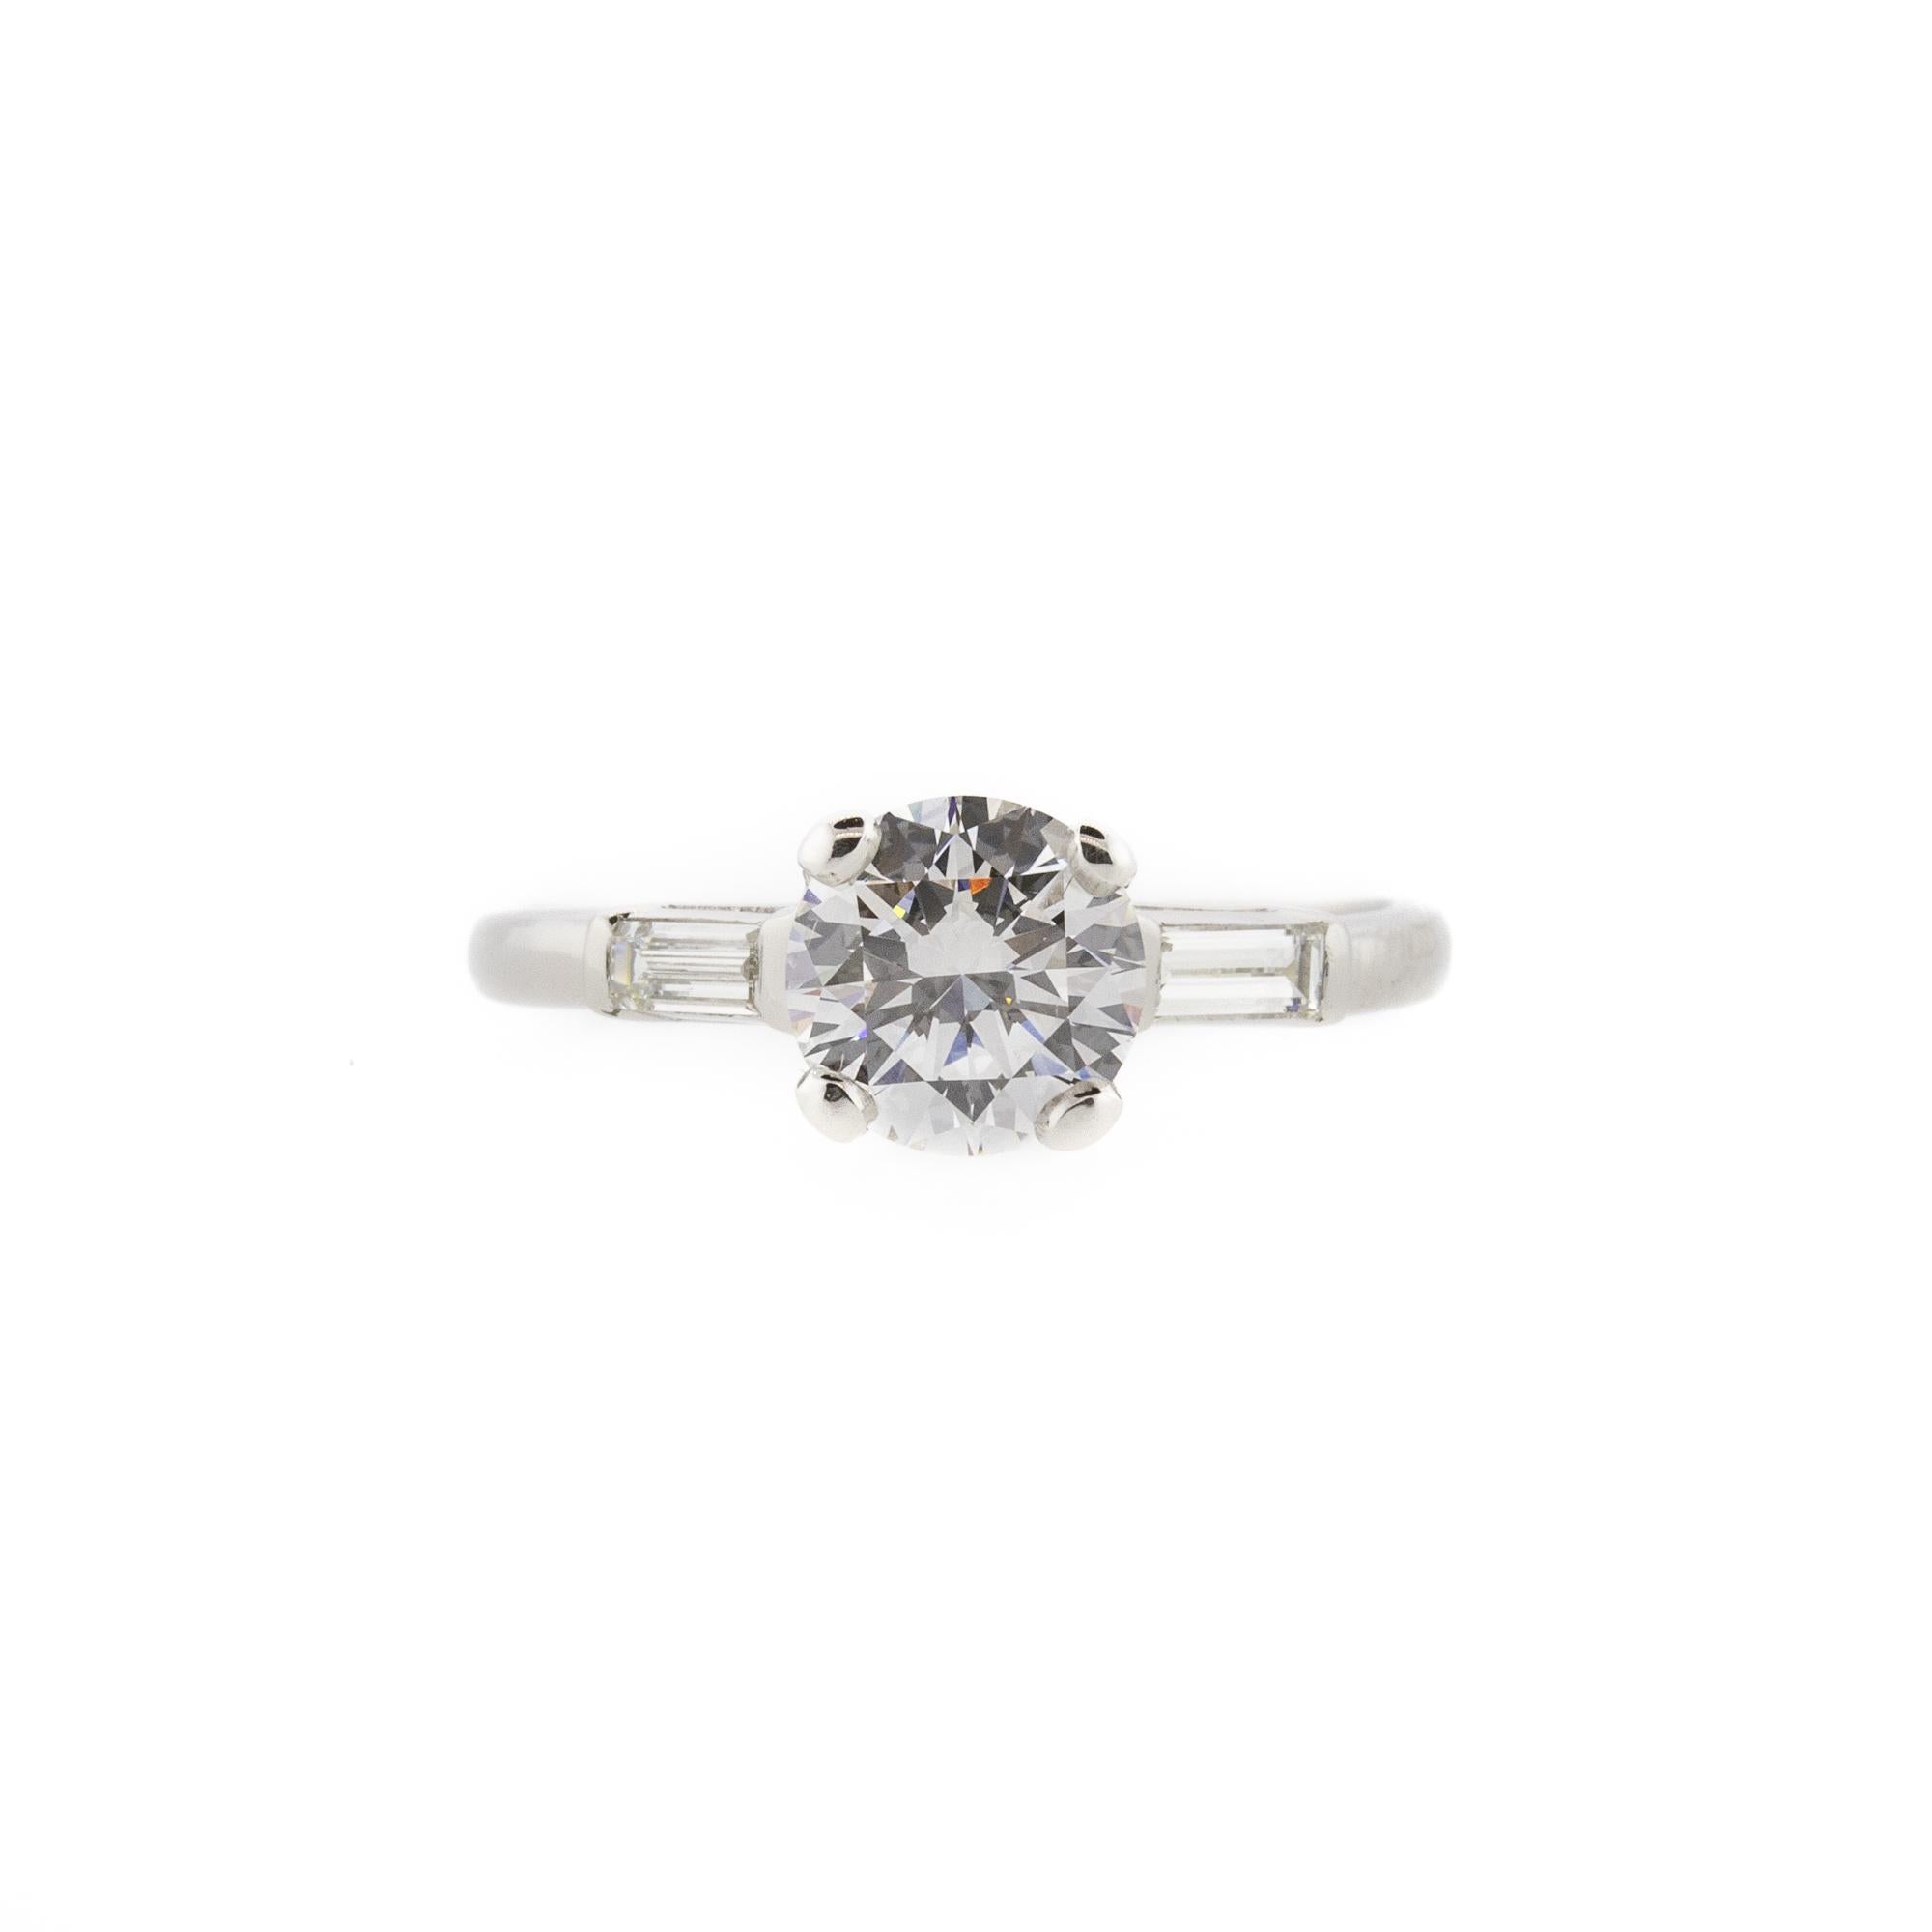 An original Art Deco setting featuring a breathtaking modern round brilliant cut center stone flanked by two equally gorgeous baguette diamonds. The center diamond is 1.14ct and rated at F in color and VVS2 in clarity set in lustrous platinum. This